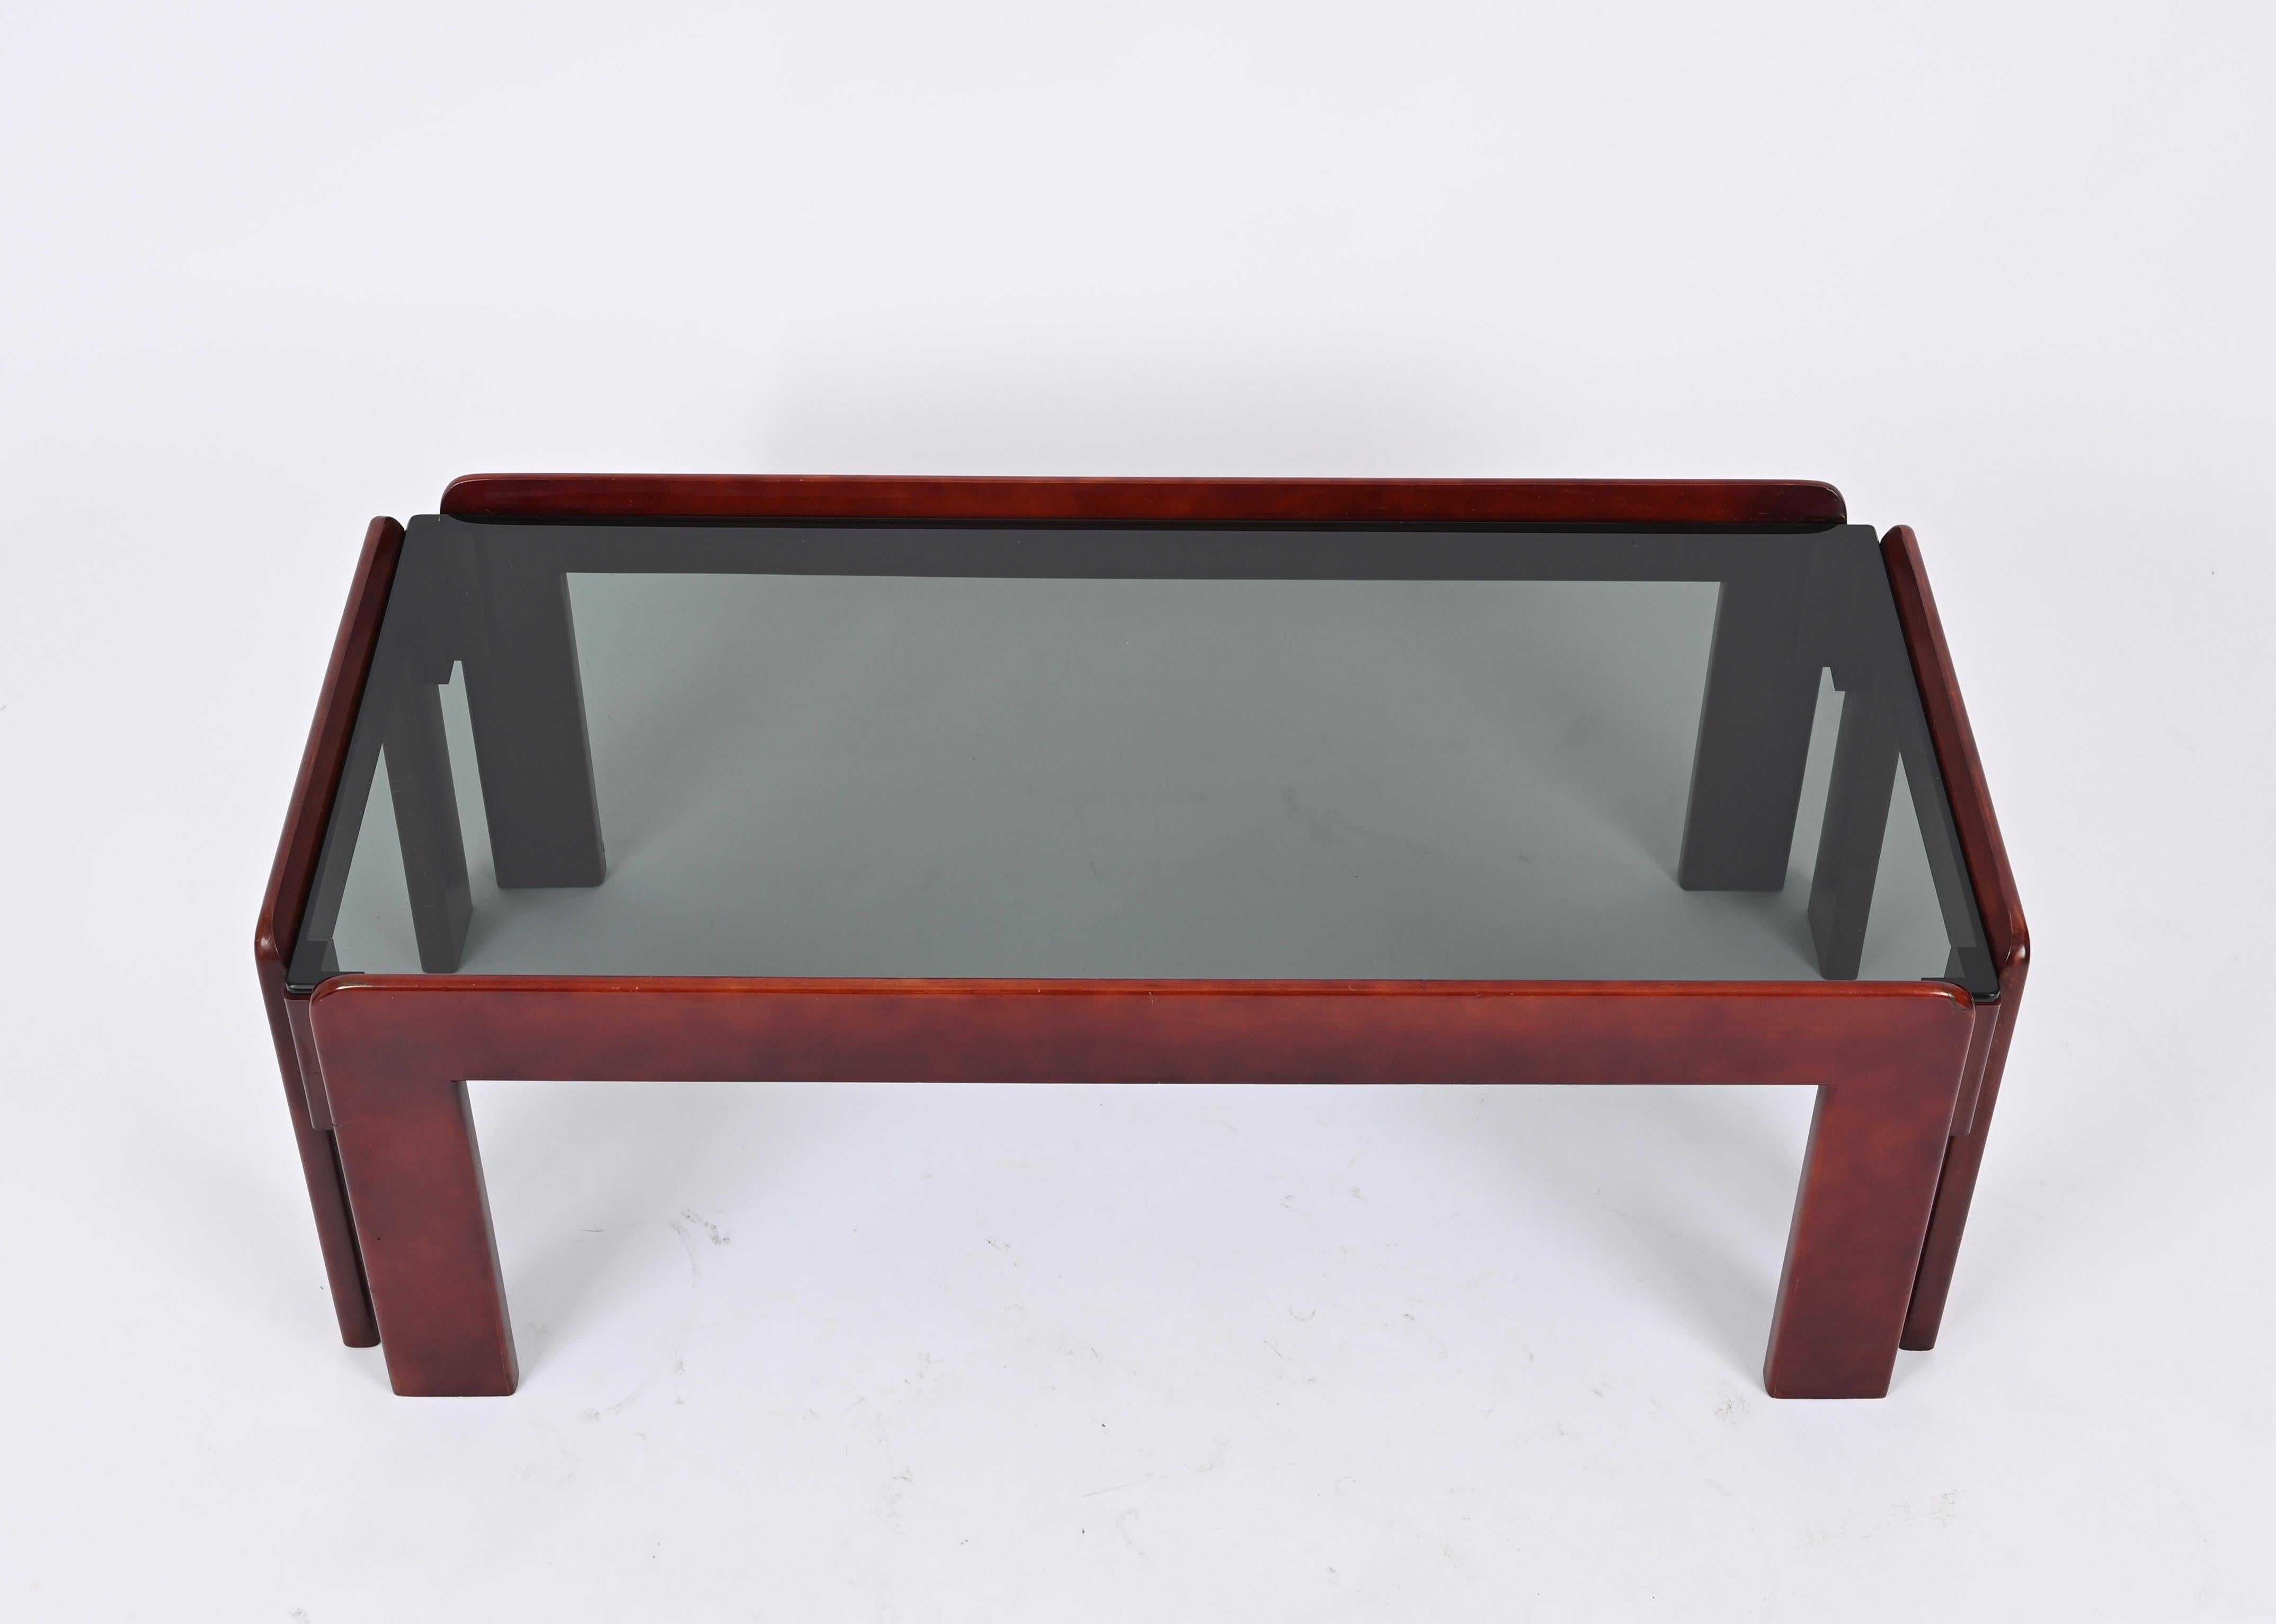 Hand-Crafted Afra & Tobia Scarpa Mid-Century Walnut Coffee Table for Cassina, Italy 1960s For Sale